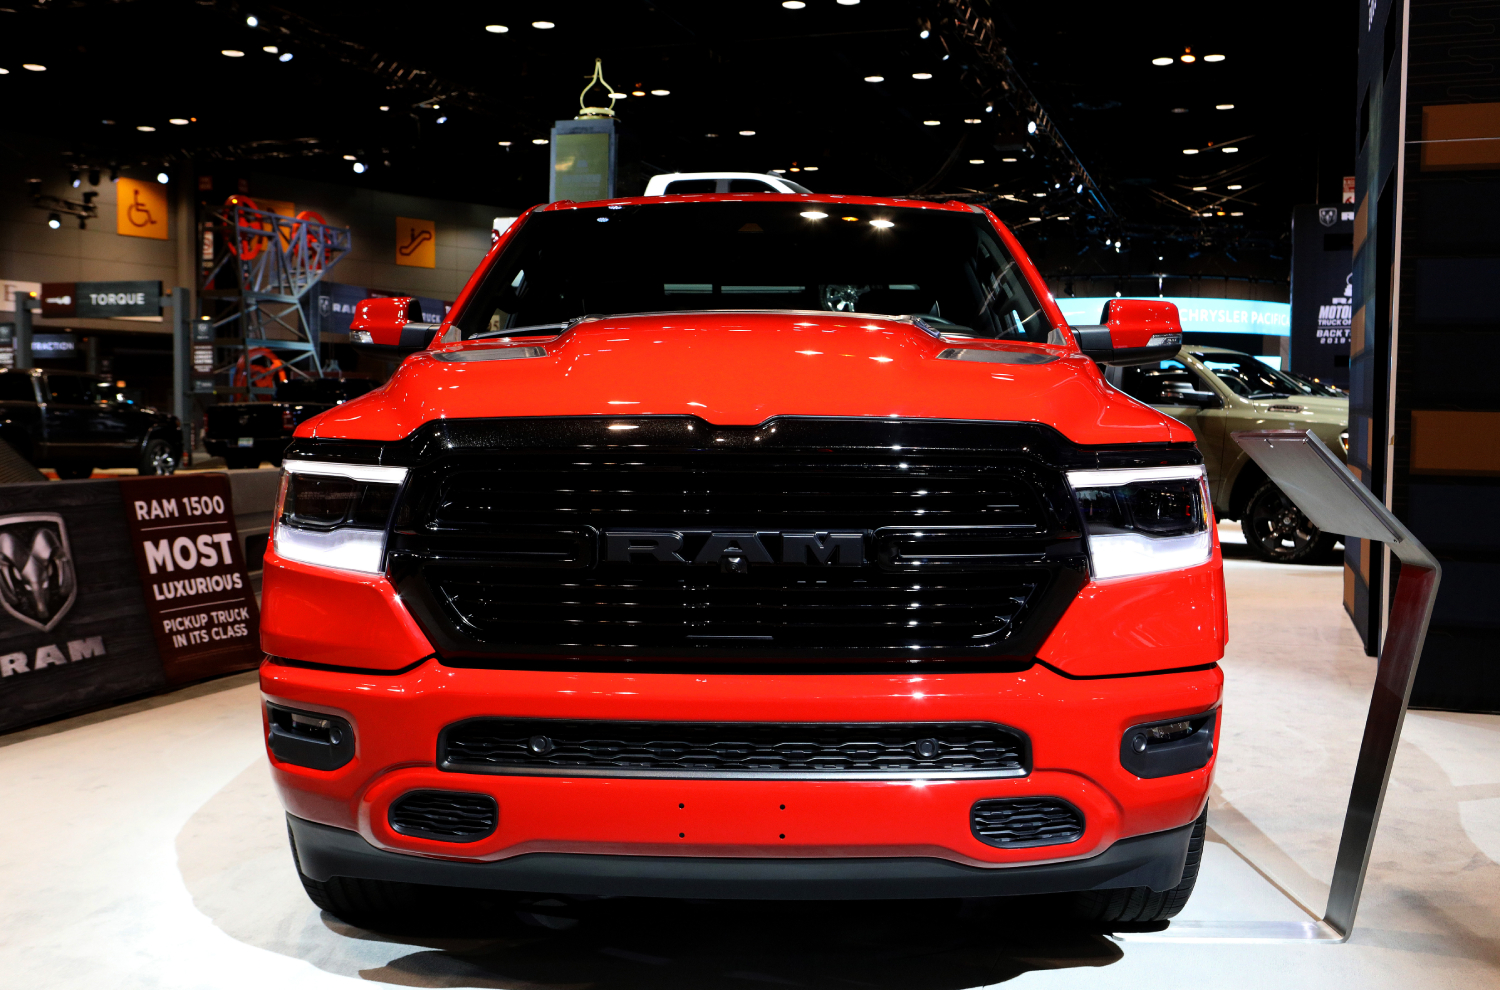 A red Ram 1500 Laramie pickup truck is on display at an auto show